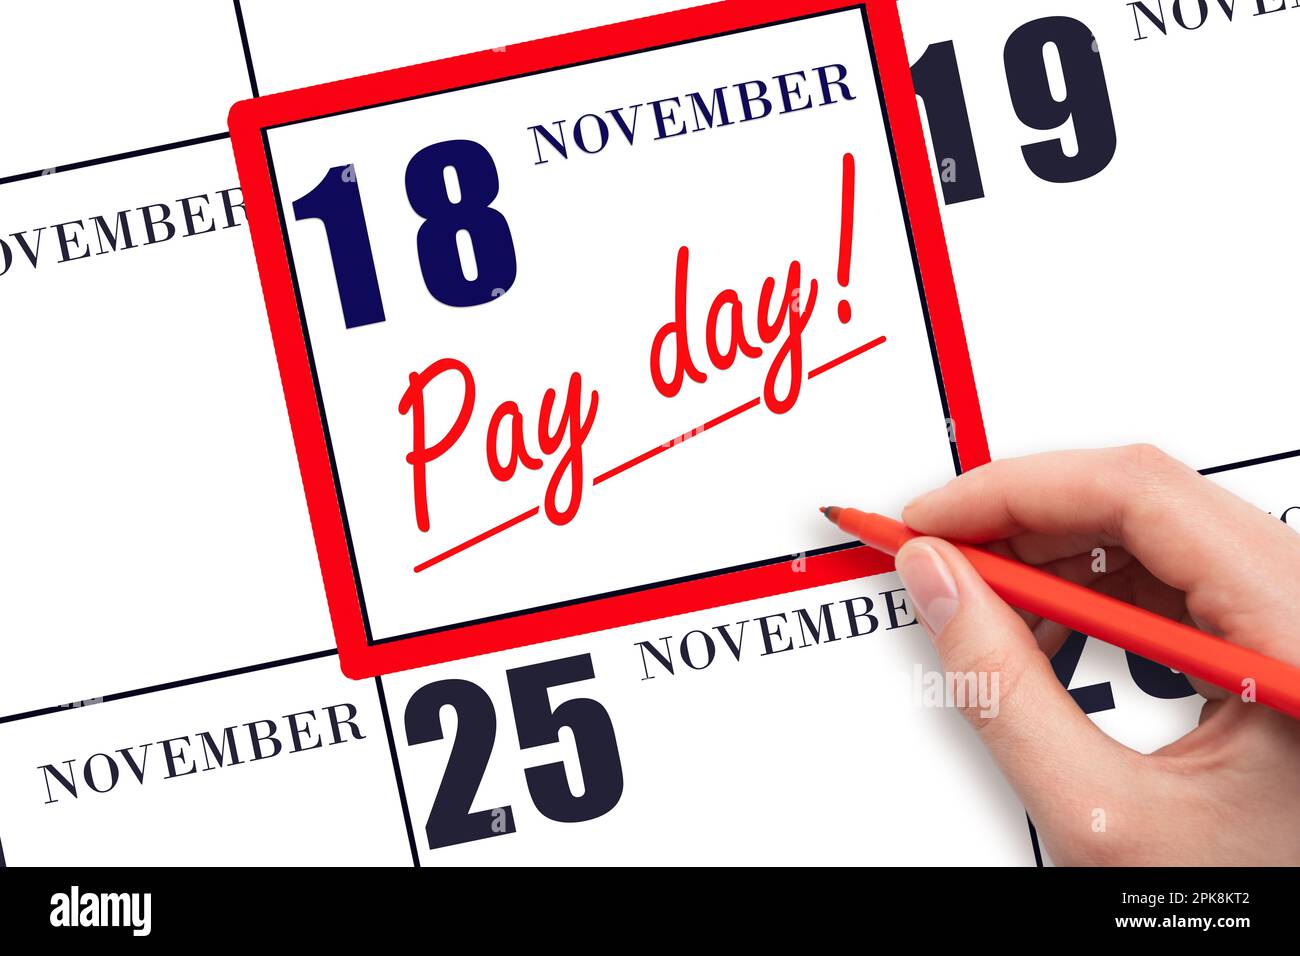 18th day of November. Hand writing text PAY DATE on calendar date November 18 and underline it. Payment due date. Reminder concept of payment. Autumn Stock Photo